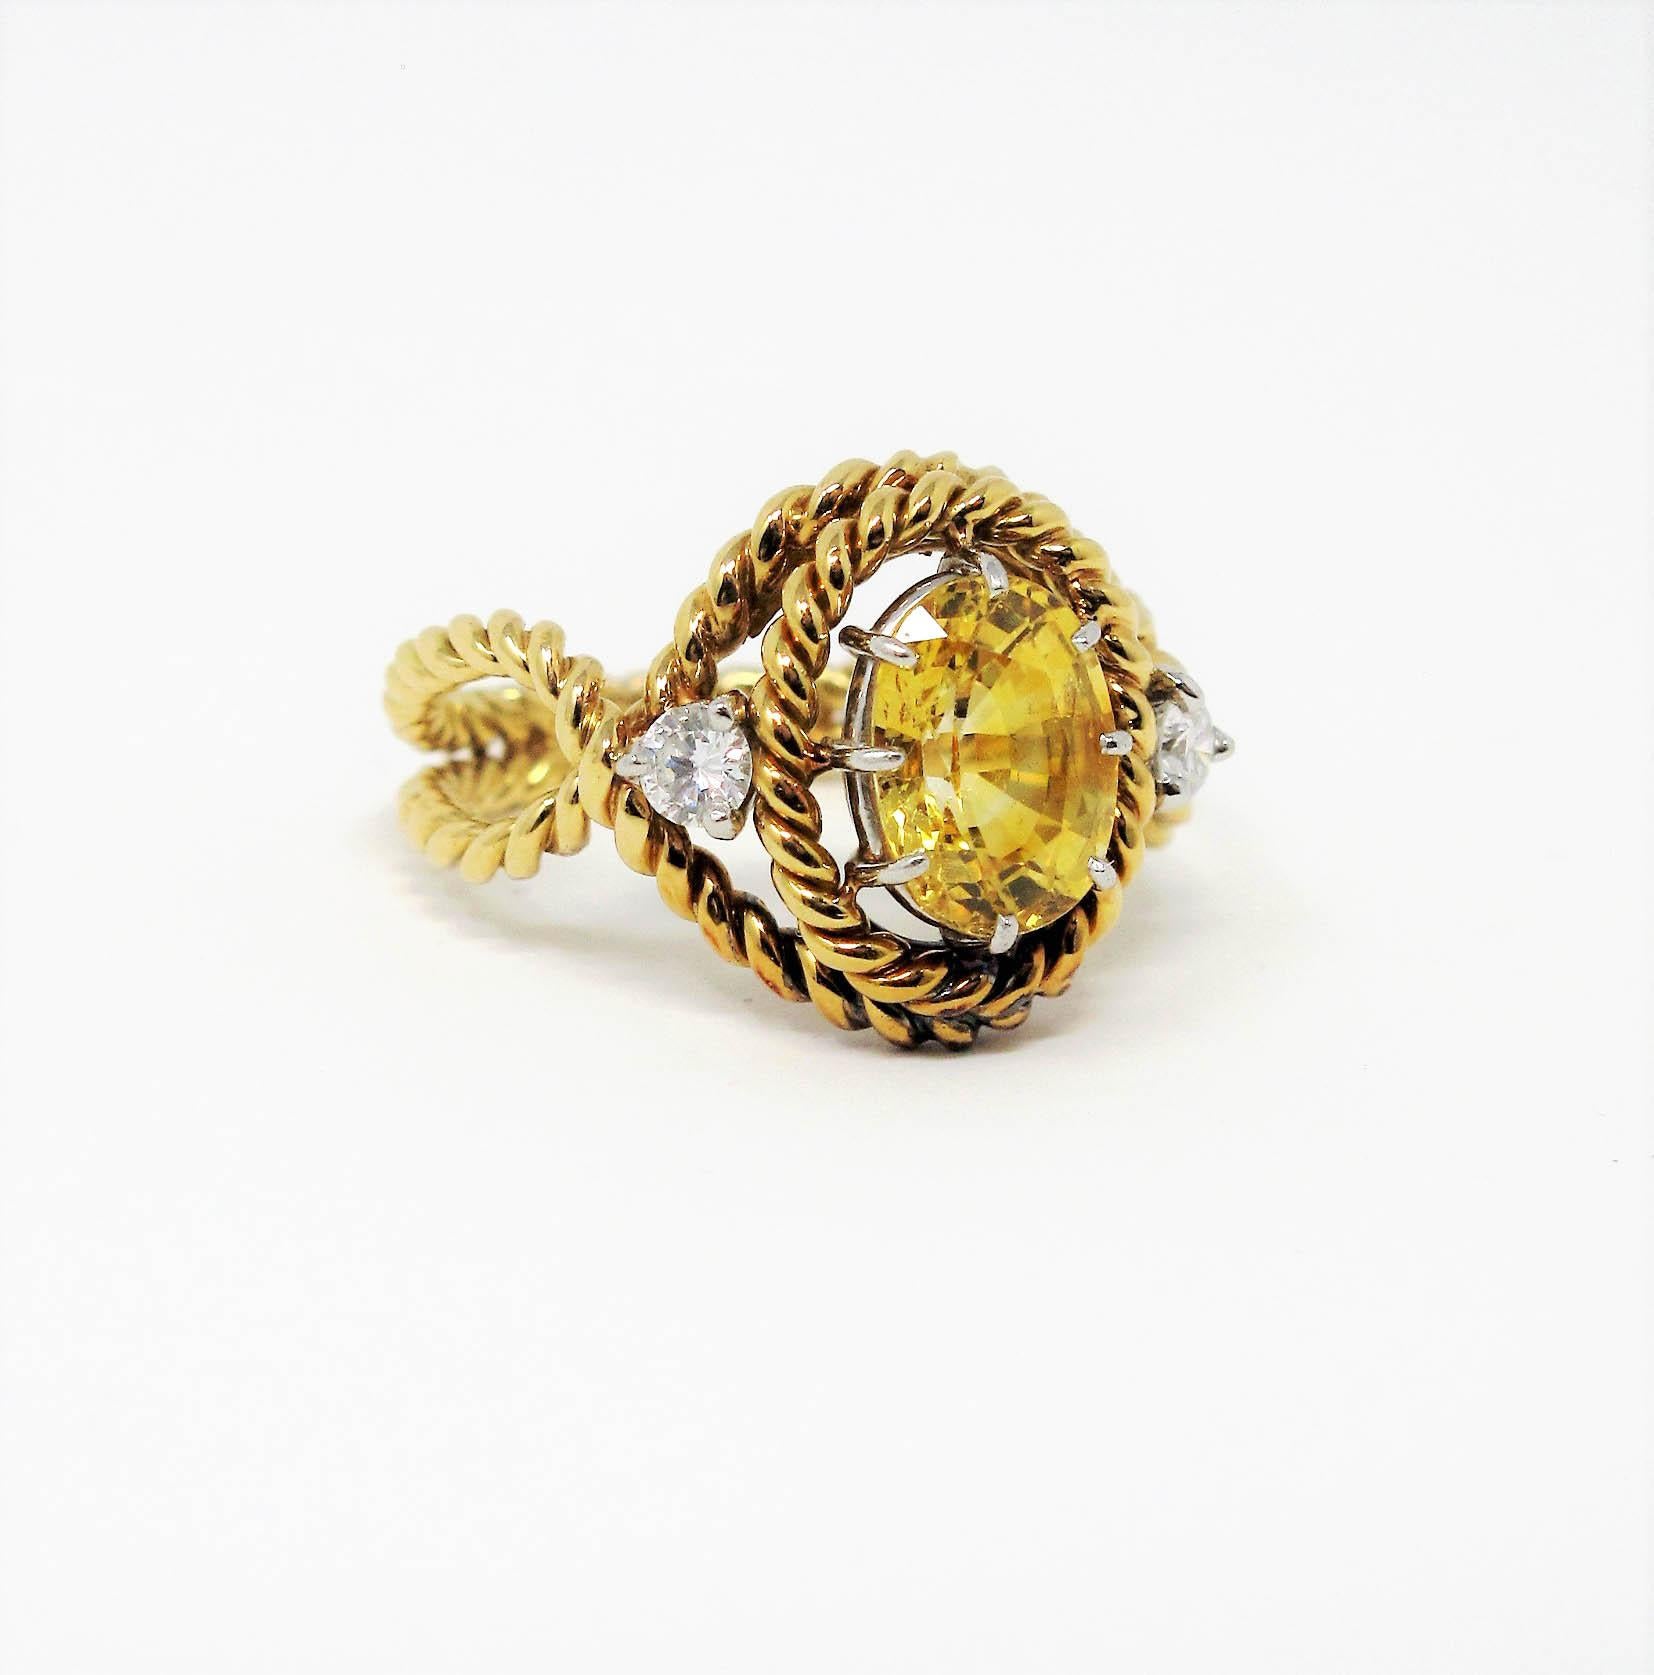 Stunning limited edition yellow sapphire and diamond ring designed by Jean Schlumberger for Tiffany & Co. This unique piece features a brilliant yellow oval mixed cut sapphire stone set among an artfully arranged twisted cable design in 18 karat